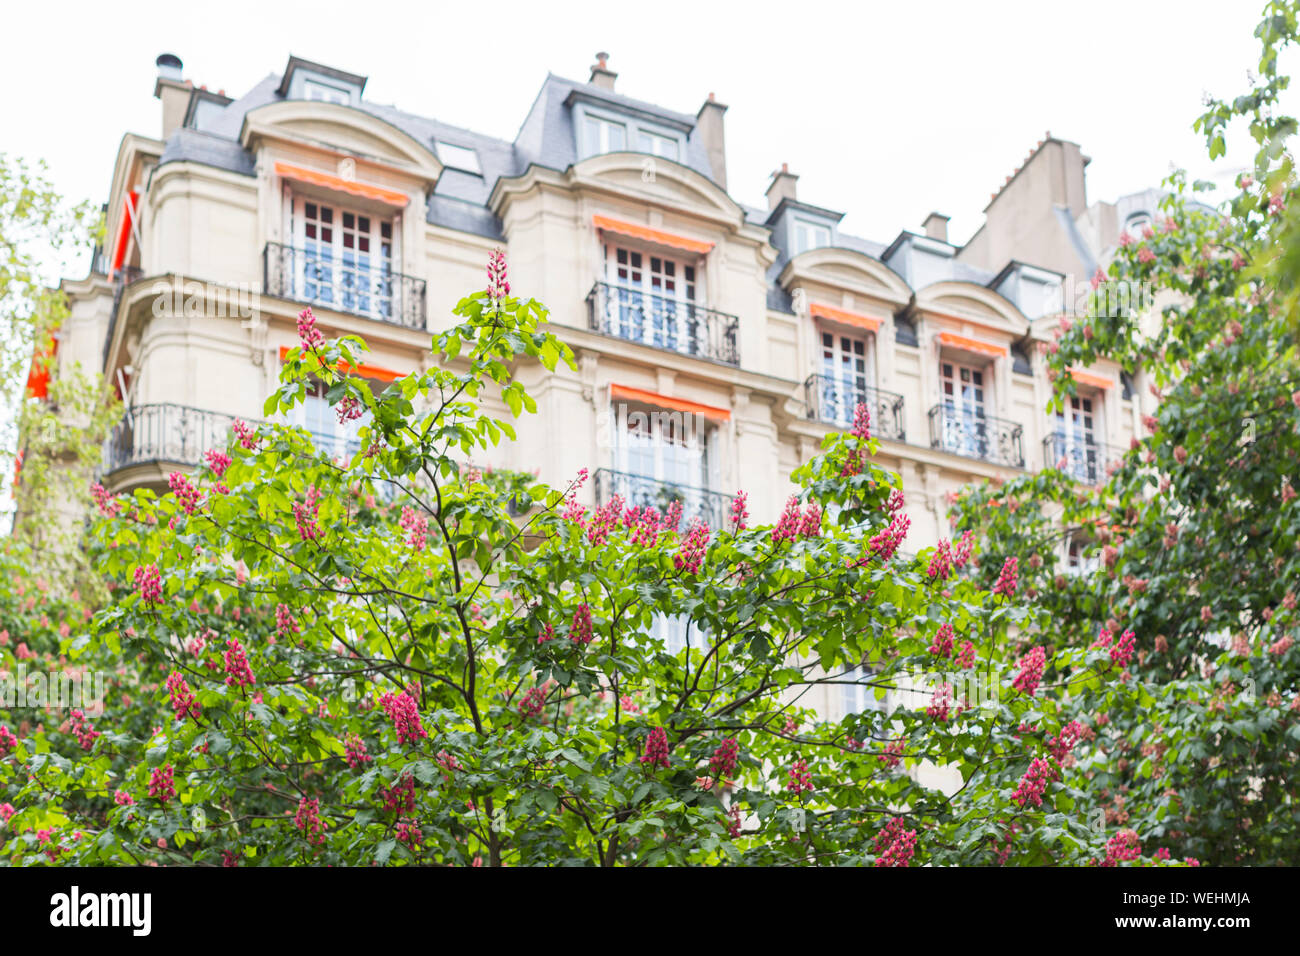 Apartment buildings with orange awnings and chestnut trees in bloom, Avenue Elysée Reclus, Paris, France Stock Photo